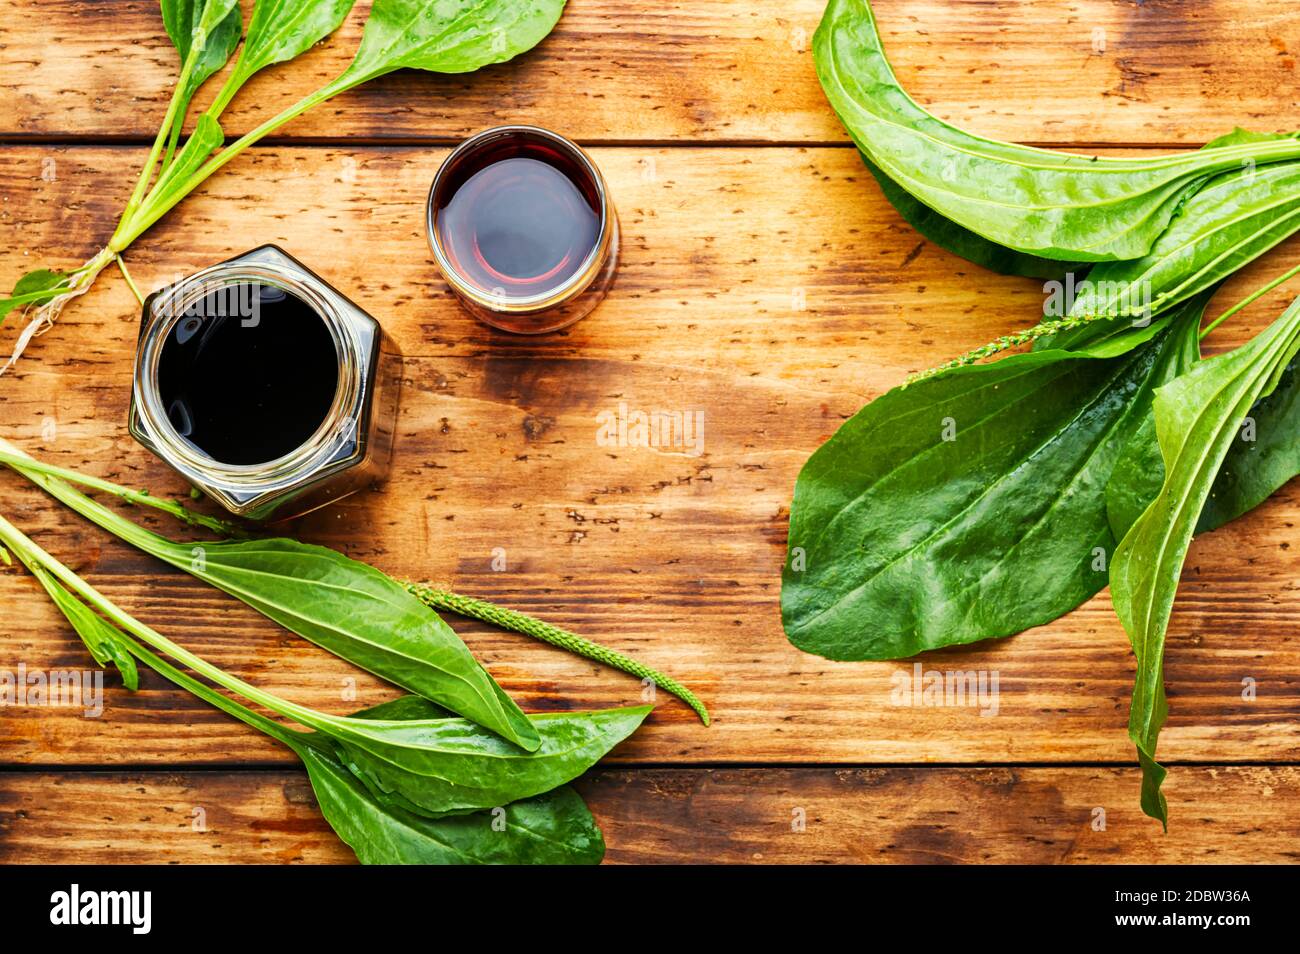 Medicinal tincture,tea,and plantain extracts.Medical herbs in herbal medicine. Stock Photo